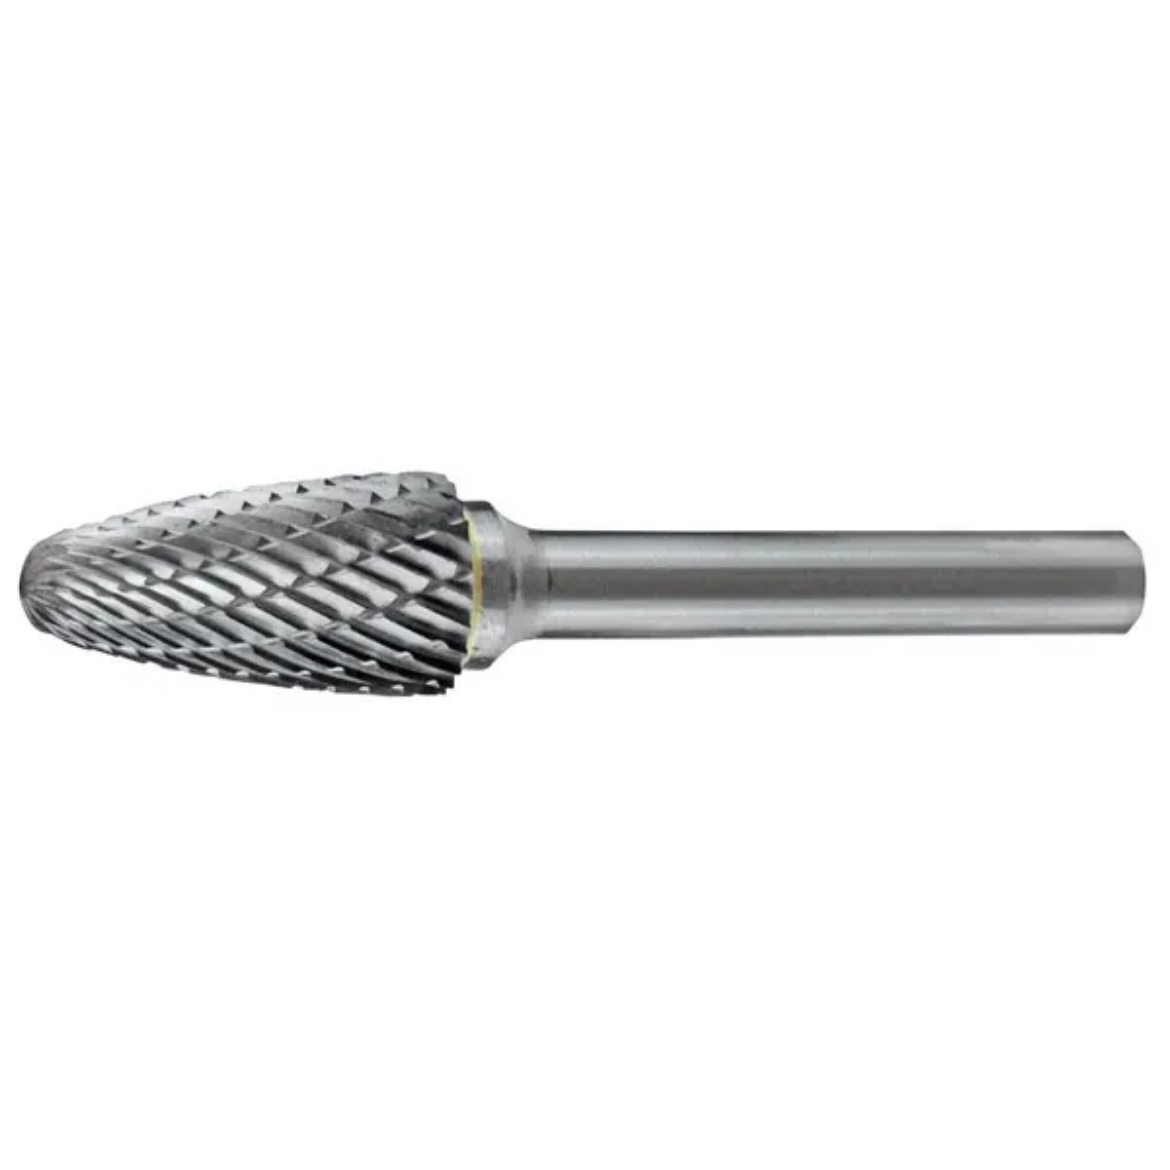 Picture of HOLEMAKER CARBIDE BURR, TREE SHAPE RADIUS END 3/8" X 3/4" HEAD, 1/4" SHANK DC